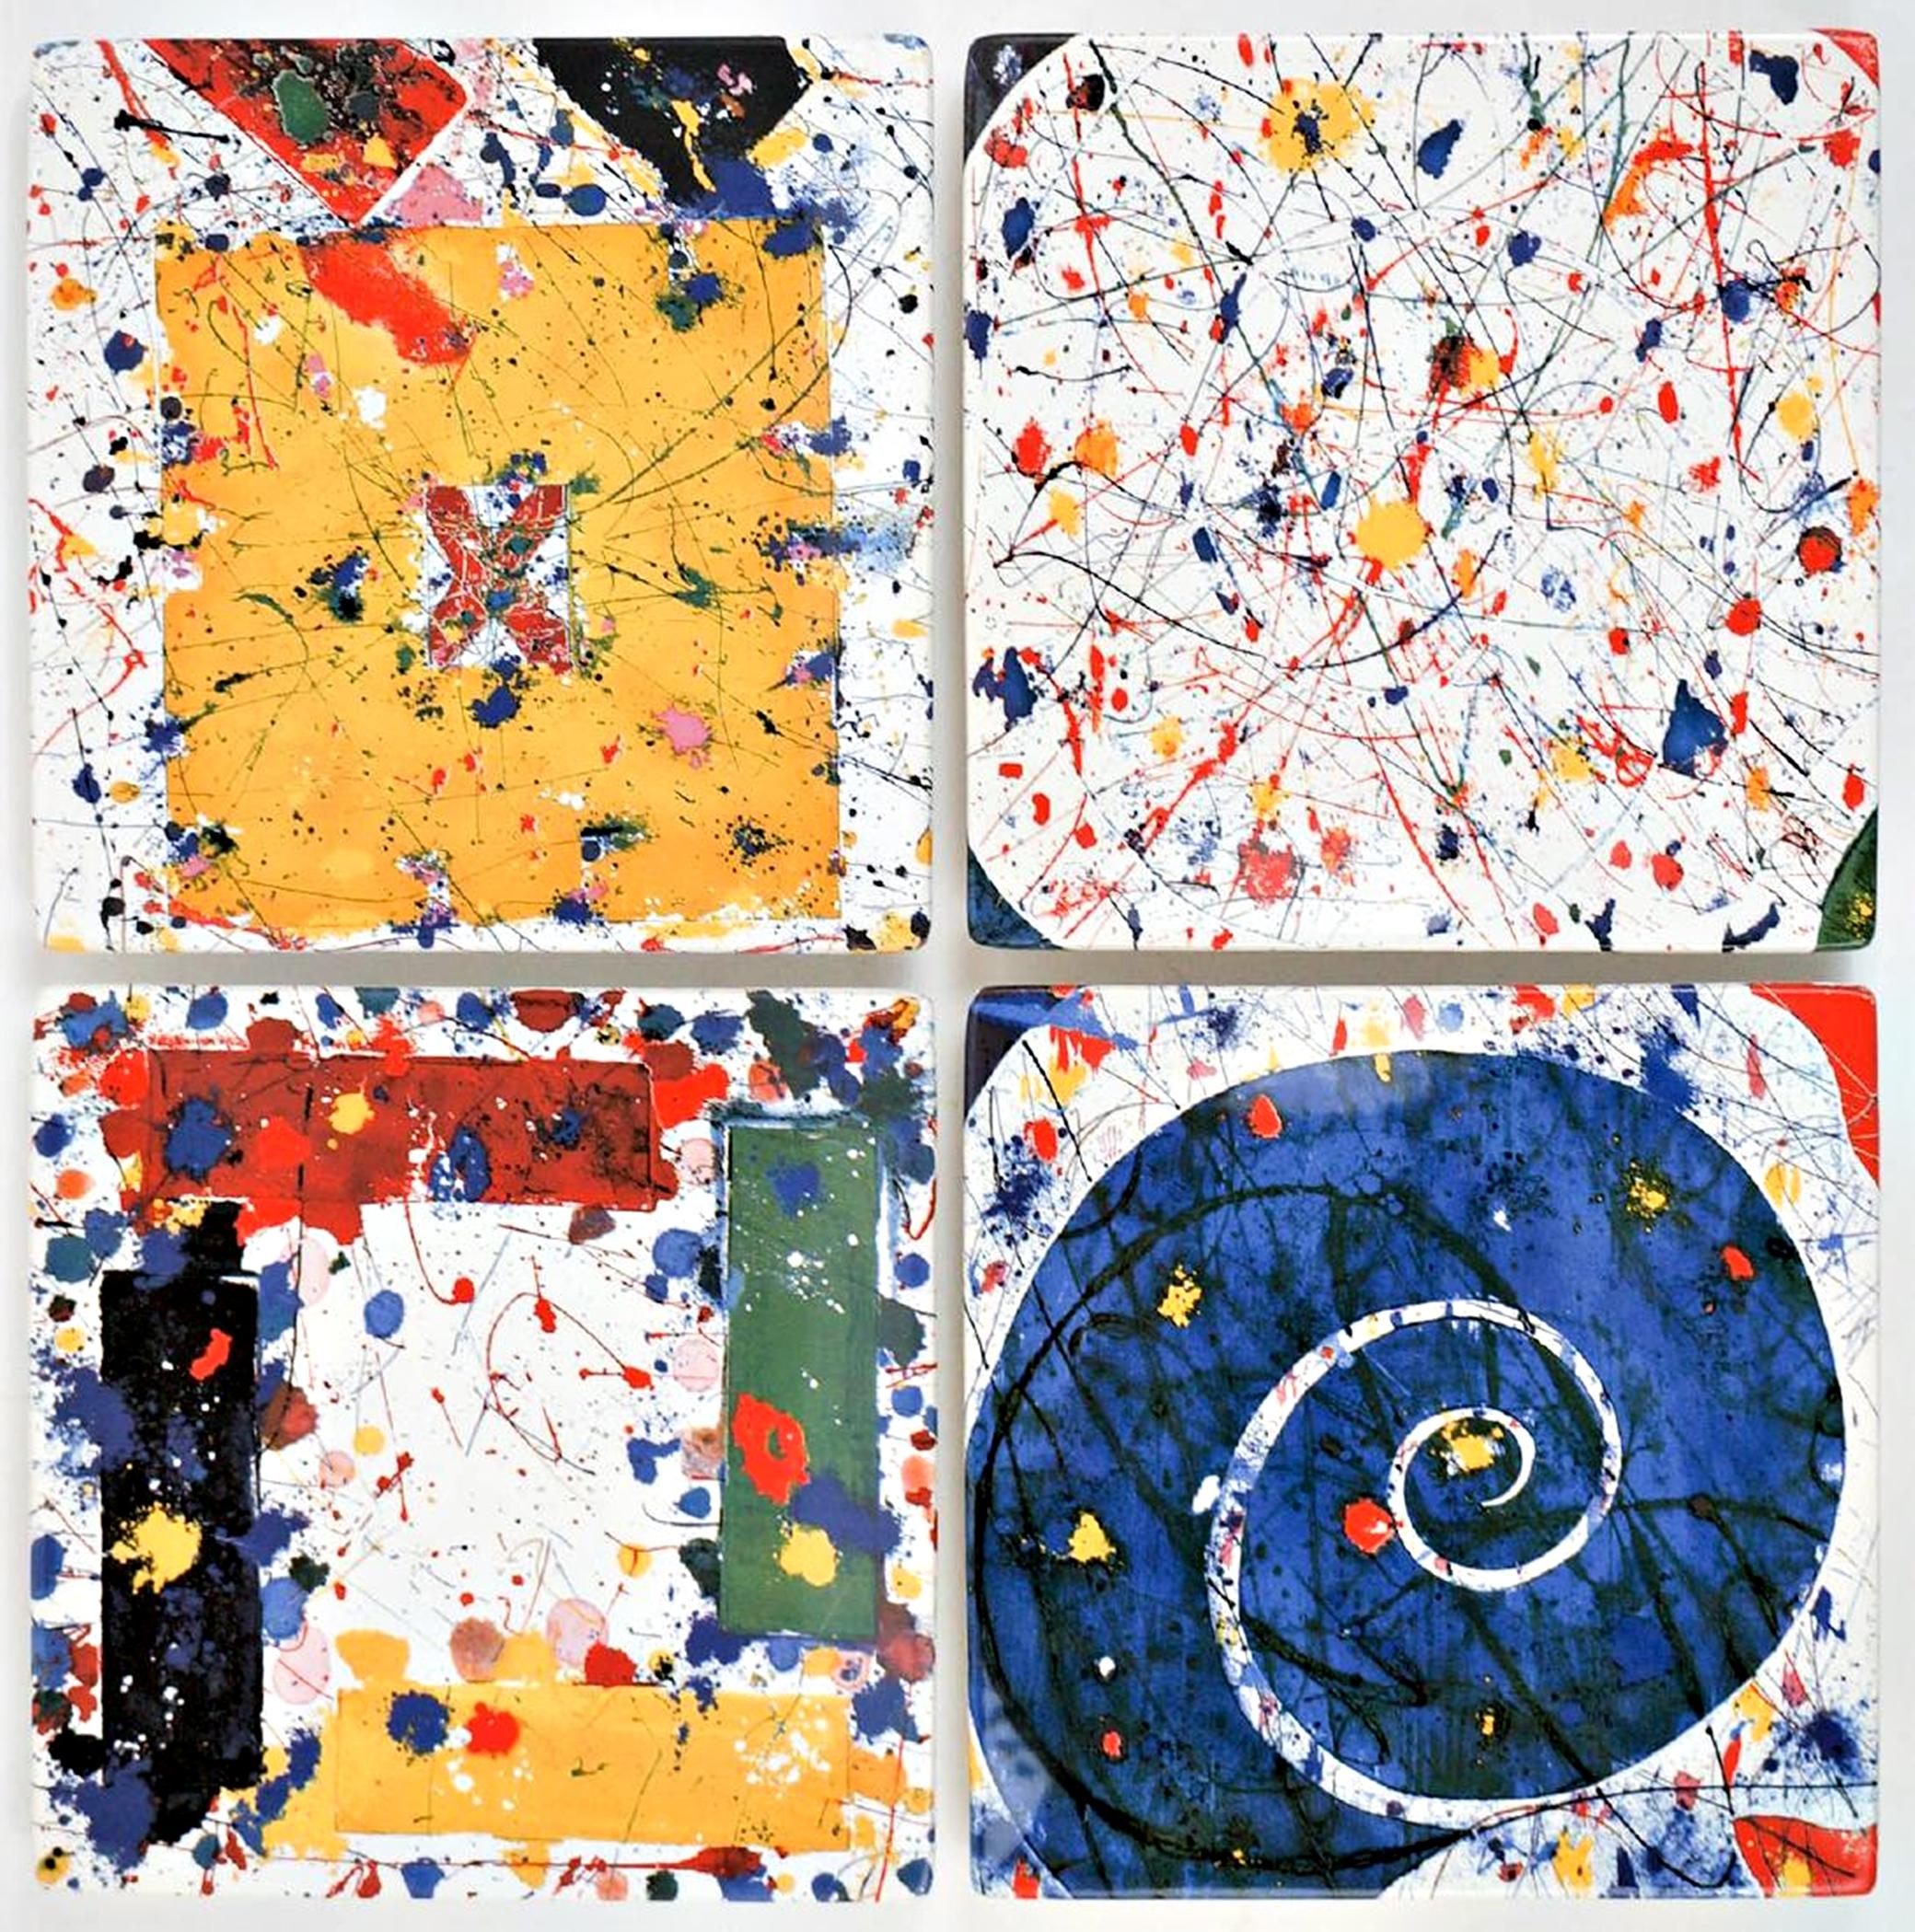 Suite of Four Limited Edition Ceramic Plates - Art by Sam Francis